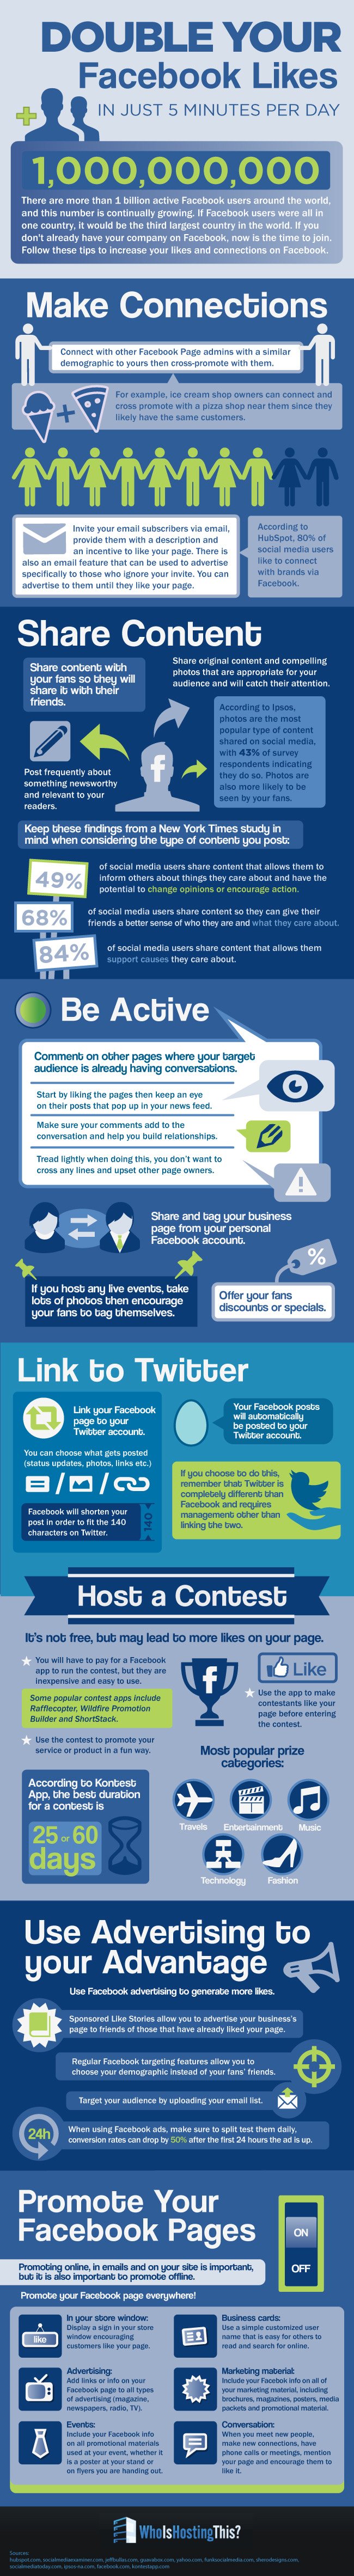 Double Your Facebook Likes In Just 5 Minutes Per Day [Infographic]